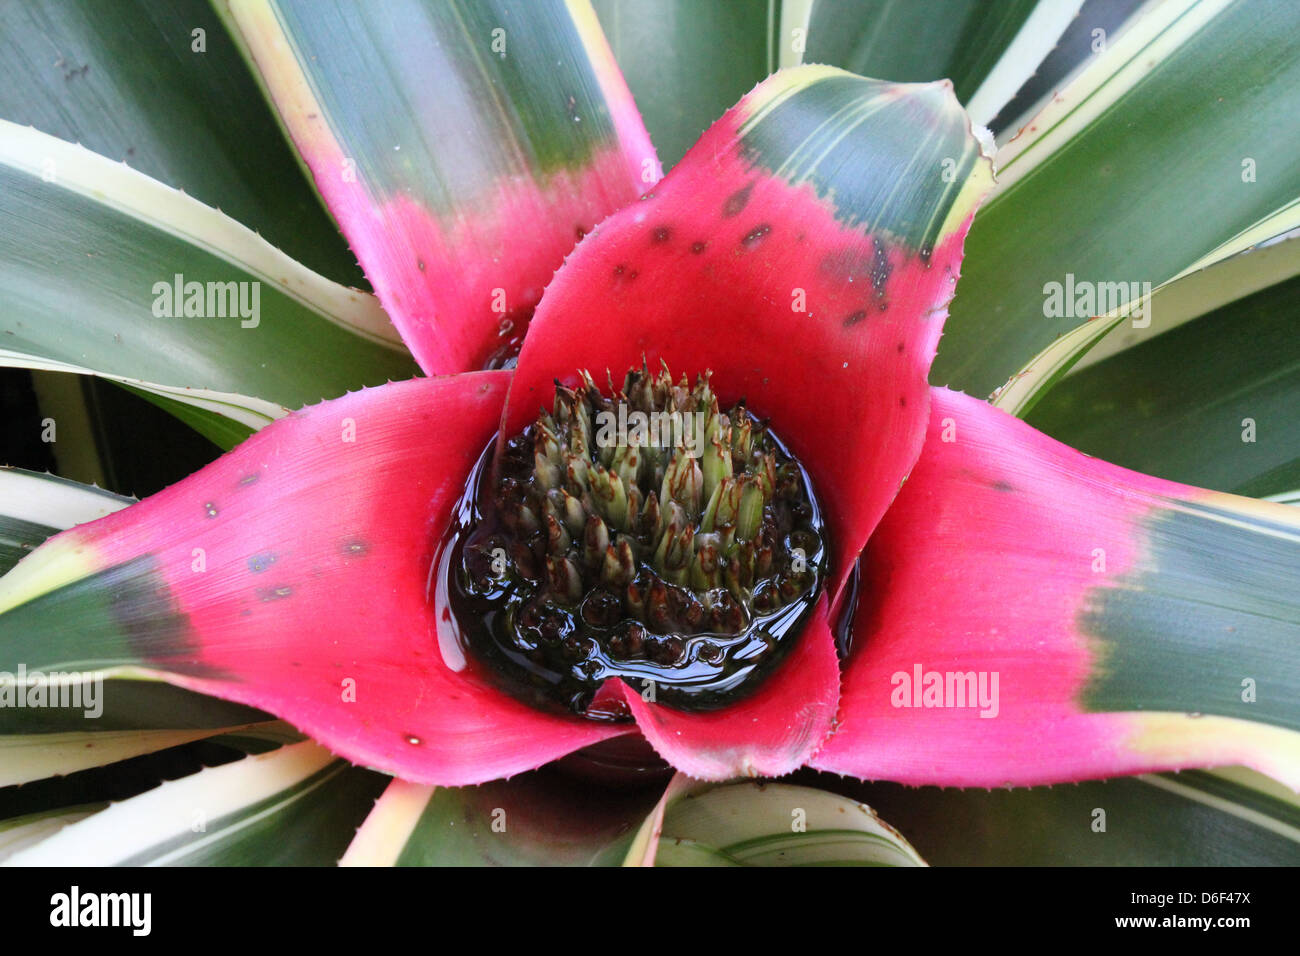 Tropical flowering plant Stock Photo